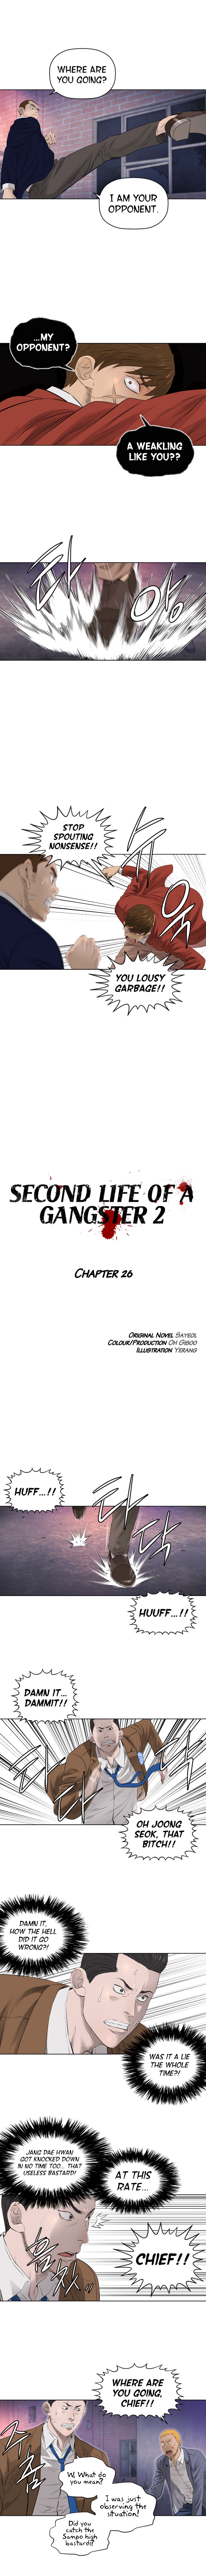 Second life of a Gangster image